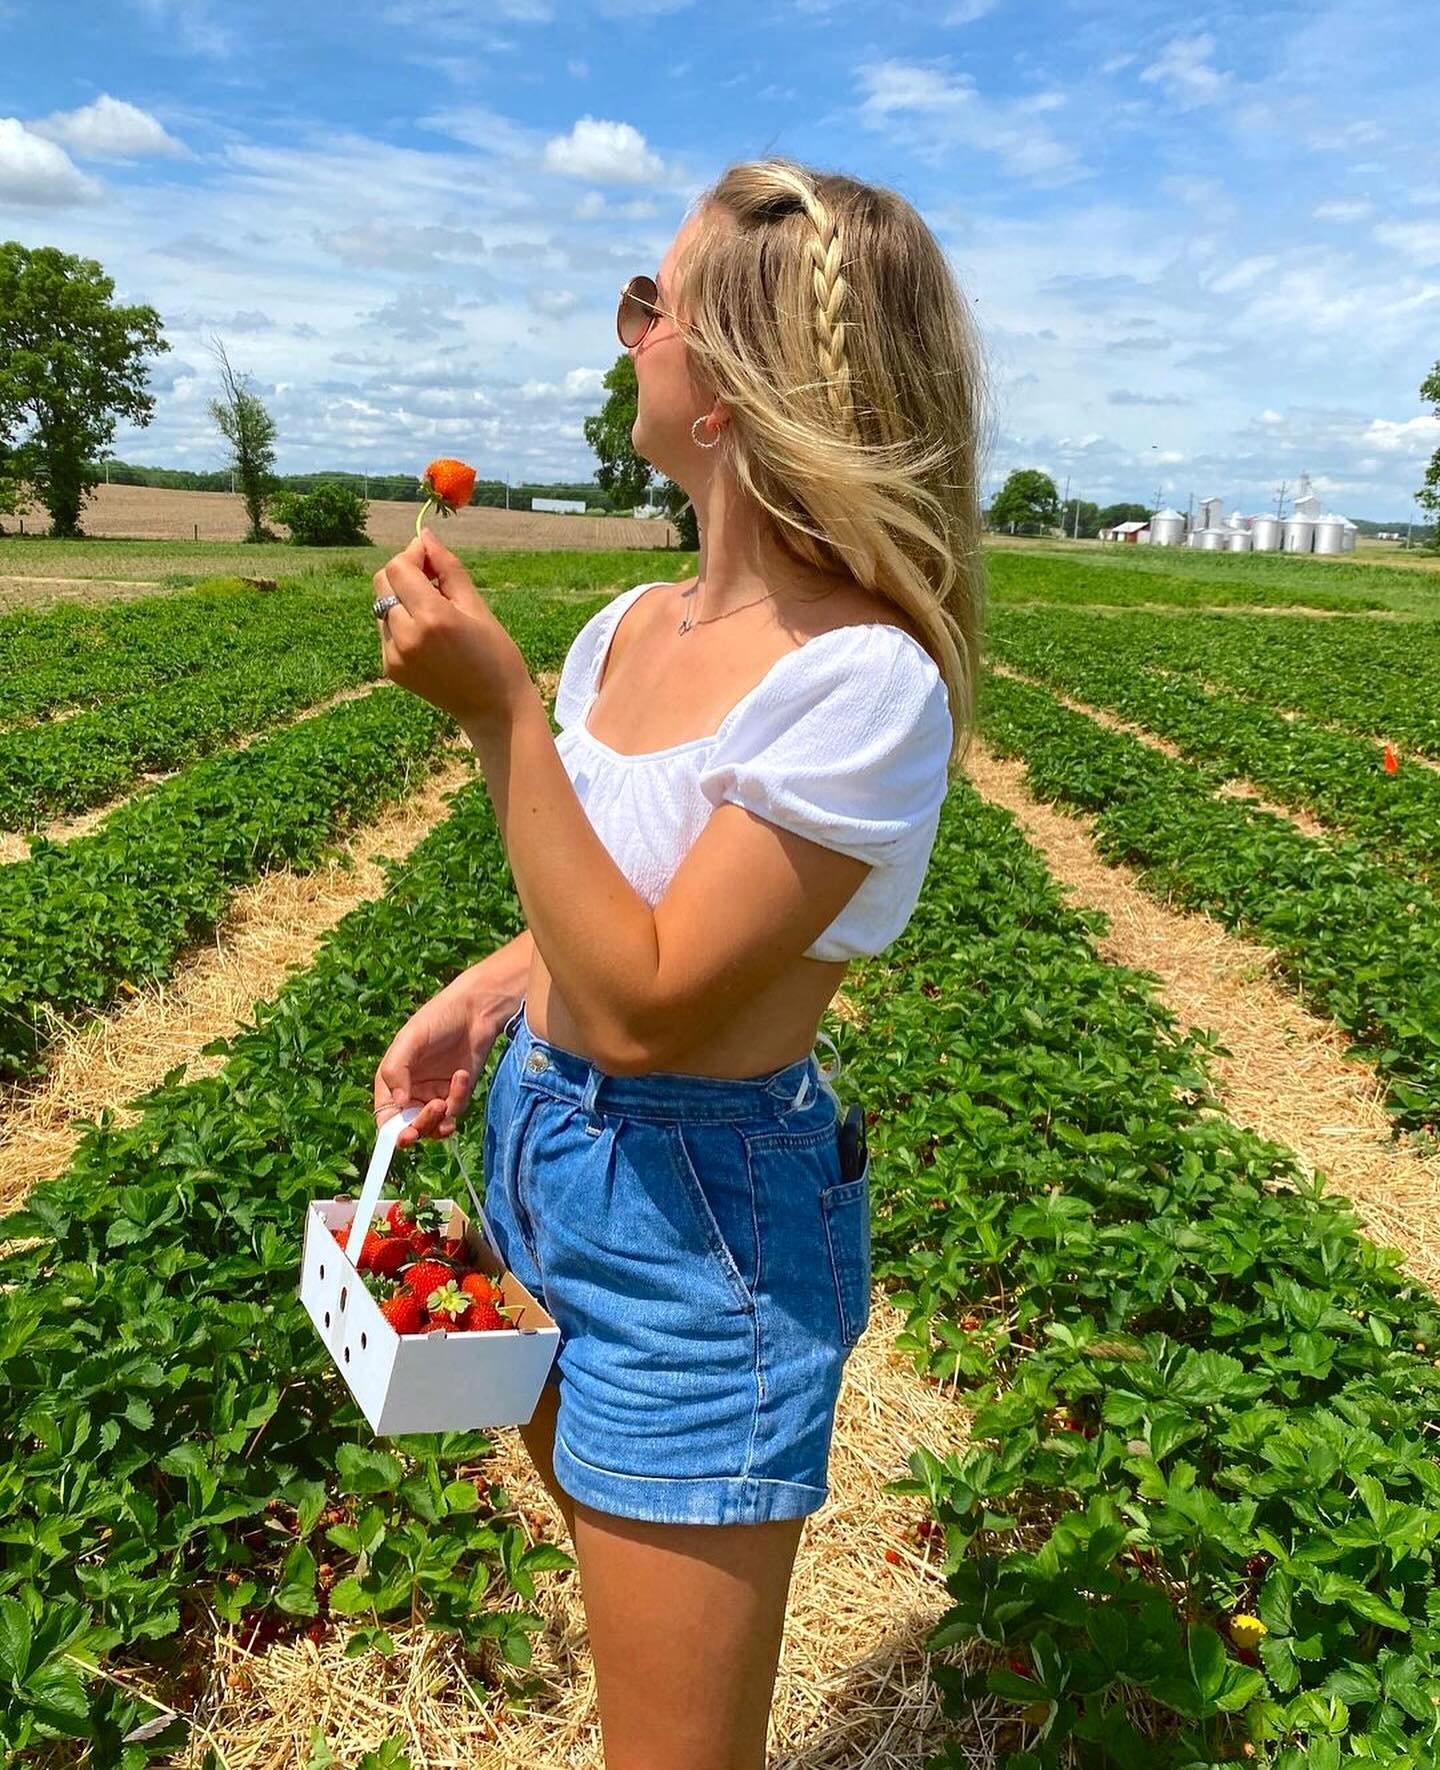 It&rsquo;s National Pick Strawberries Day! 🍓 Parke County is home to Ditzler Orchard, a family-friendly farm experience where you can buy/pick your own strawberries, apples, cherries, peaches &amp; more! ❤ 

Location: 8902 S 625 W, Rosedale, IN 4787